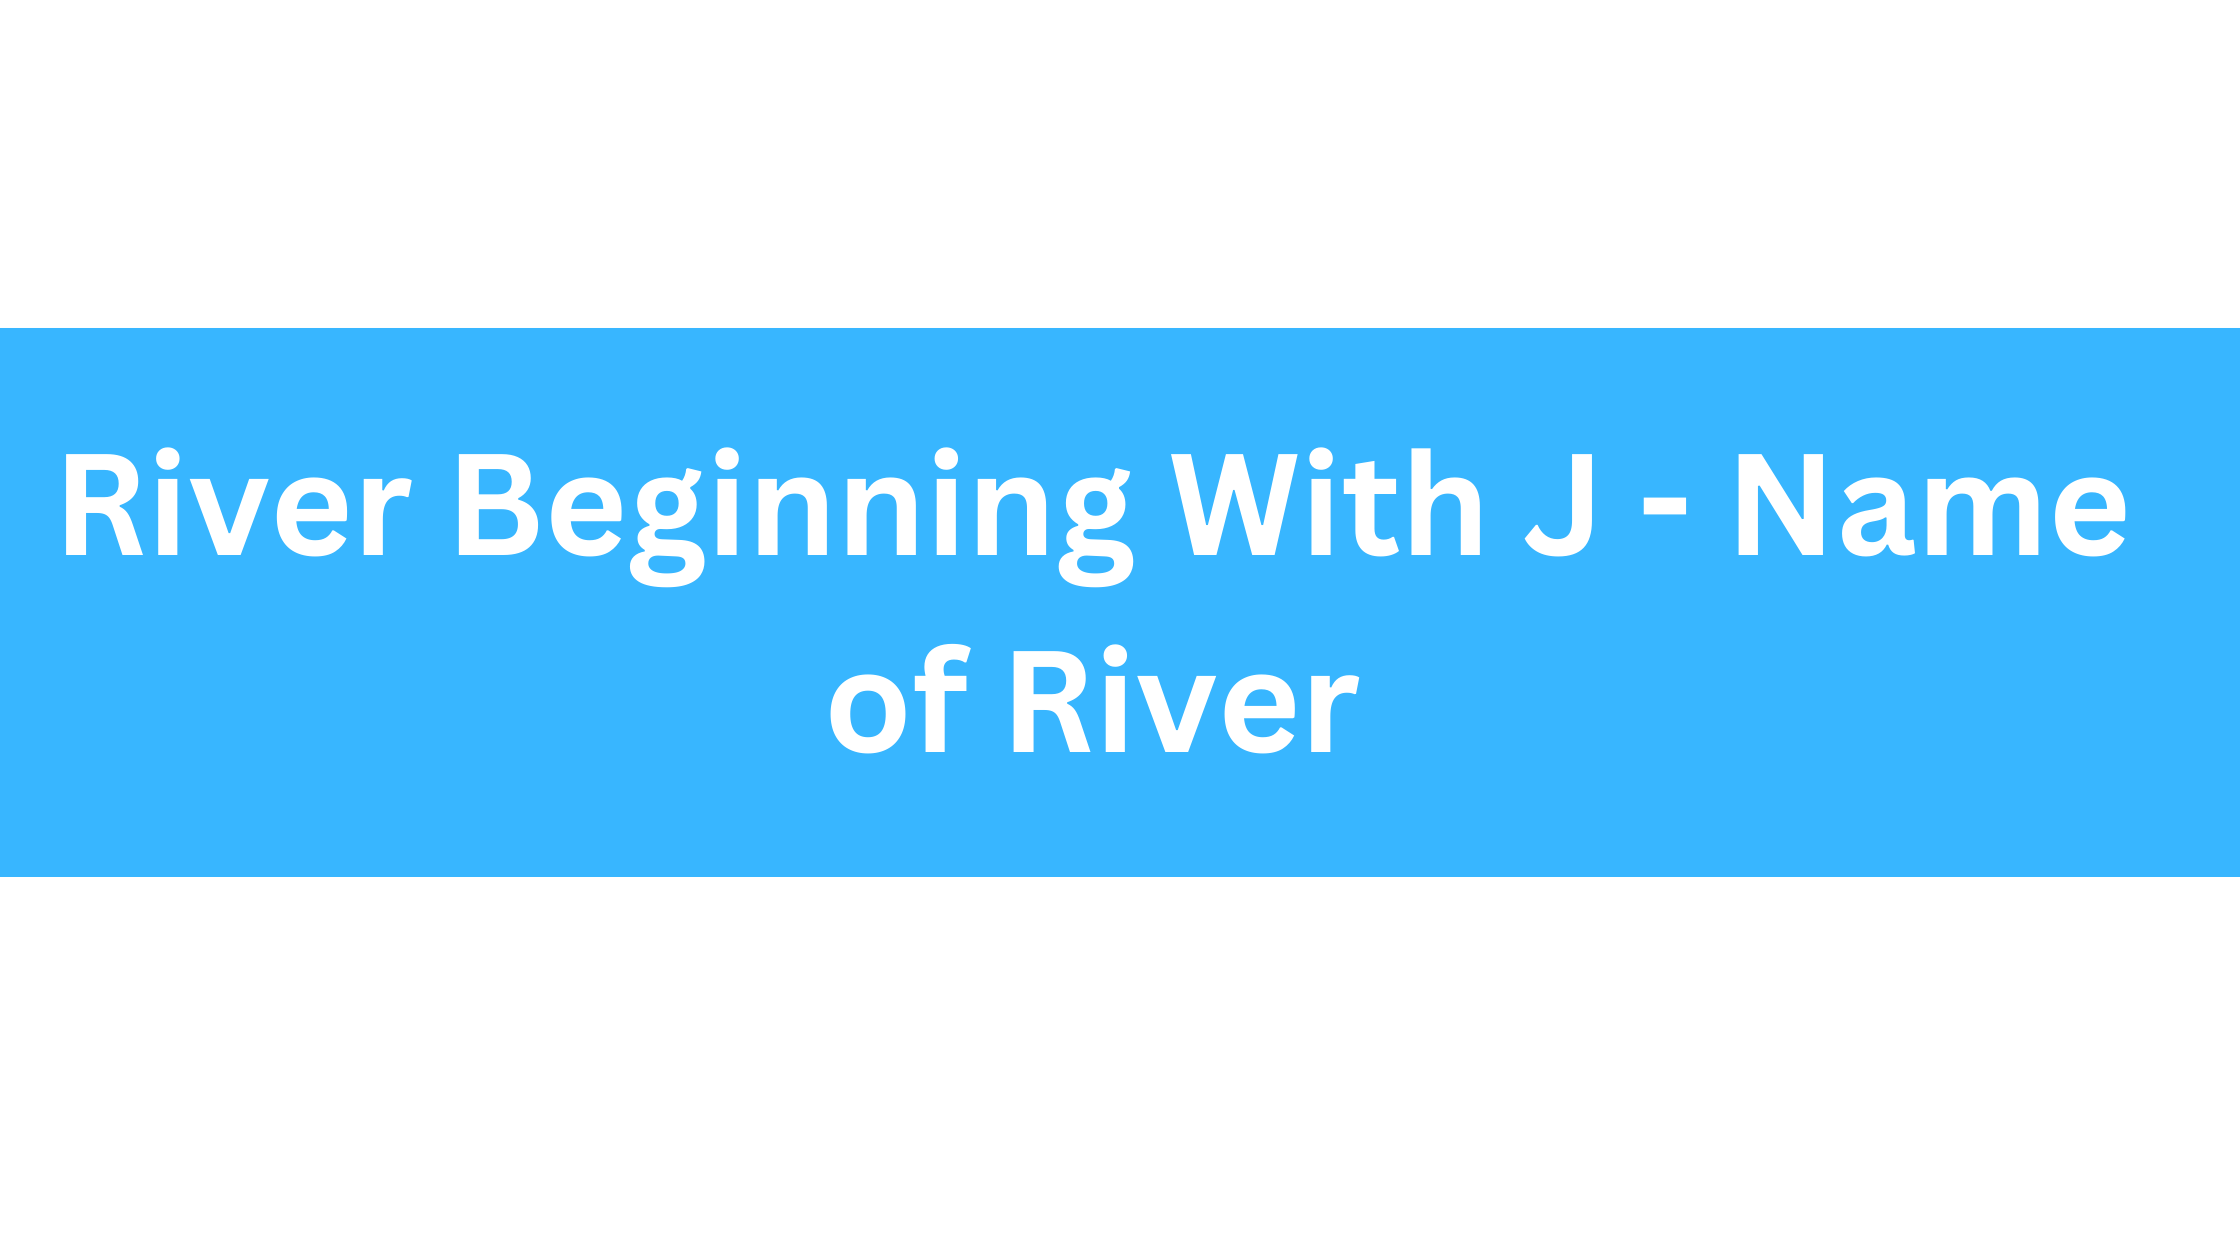 River Beginning With J